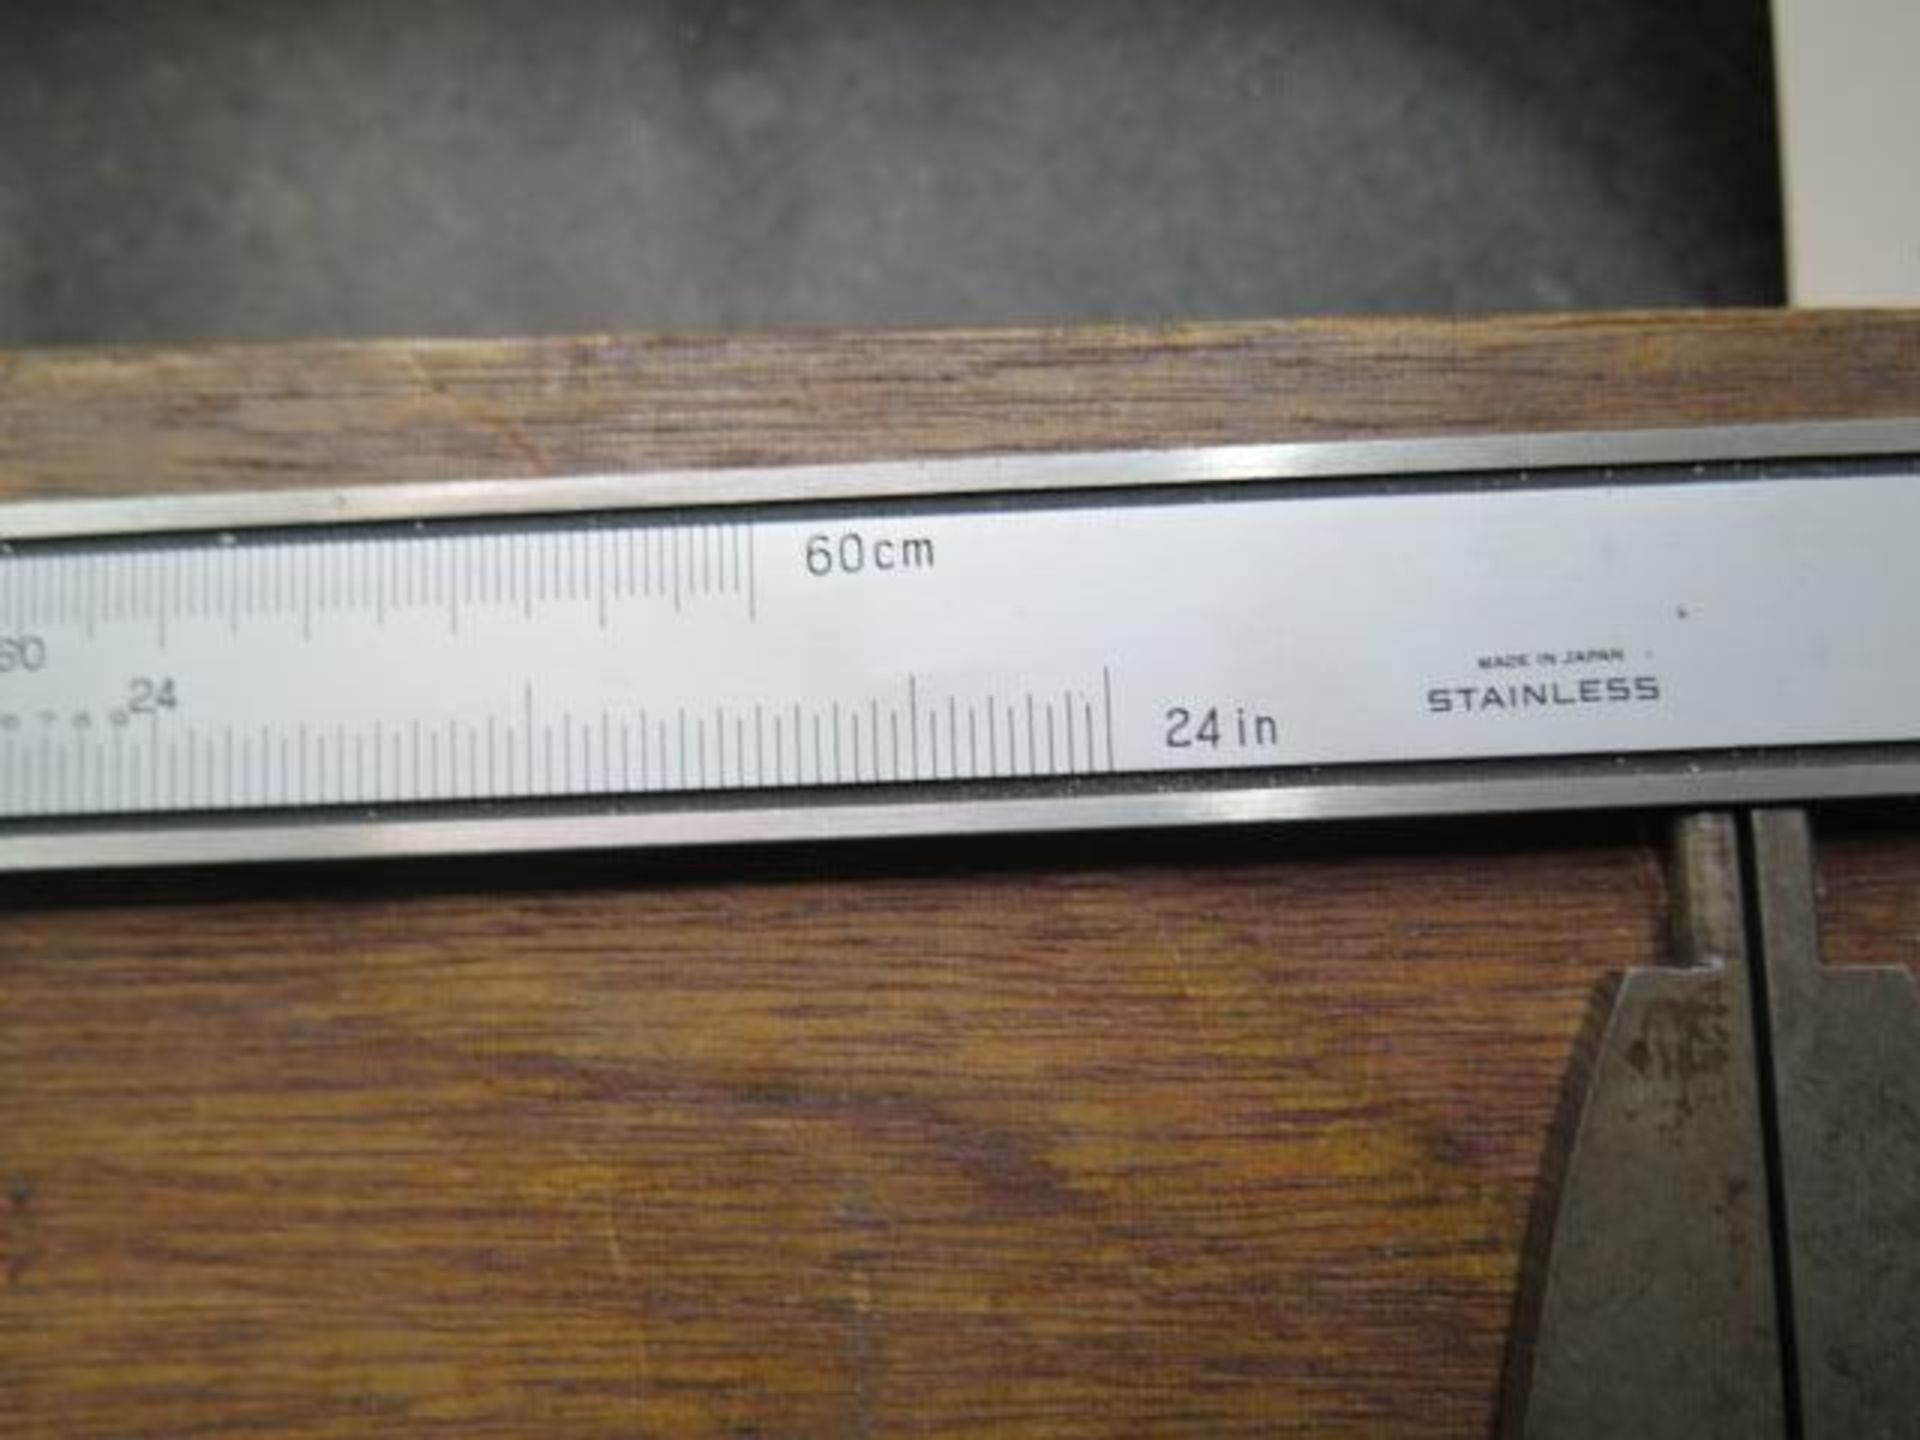 Kanon and Stalex 24" Vernier Calipers (2) (SOLD AS-IS - NO WARRANTY) - Bild 4 aus 4